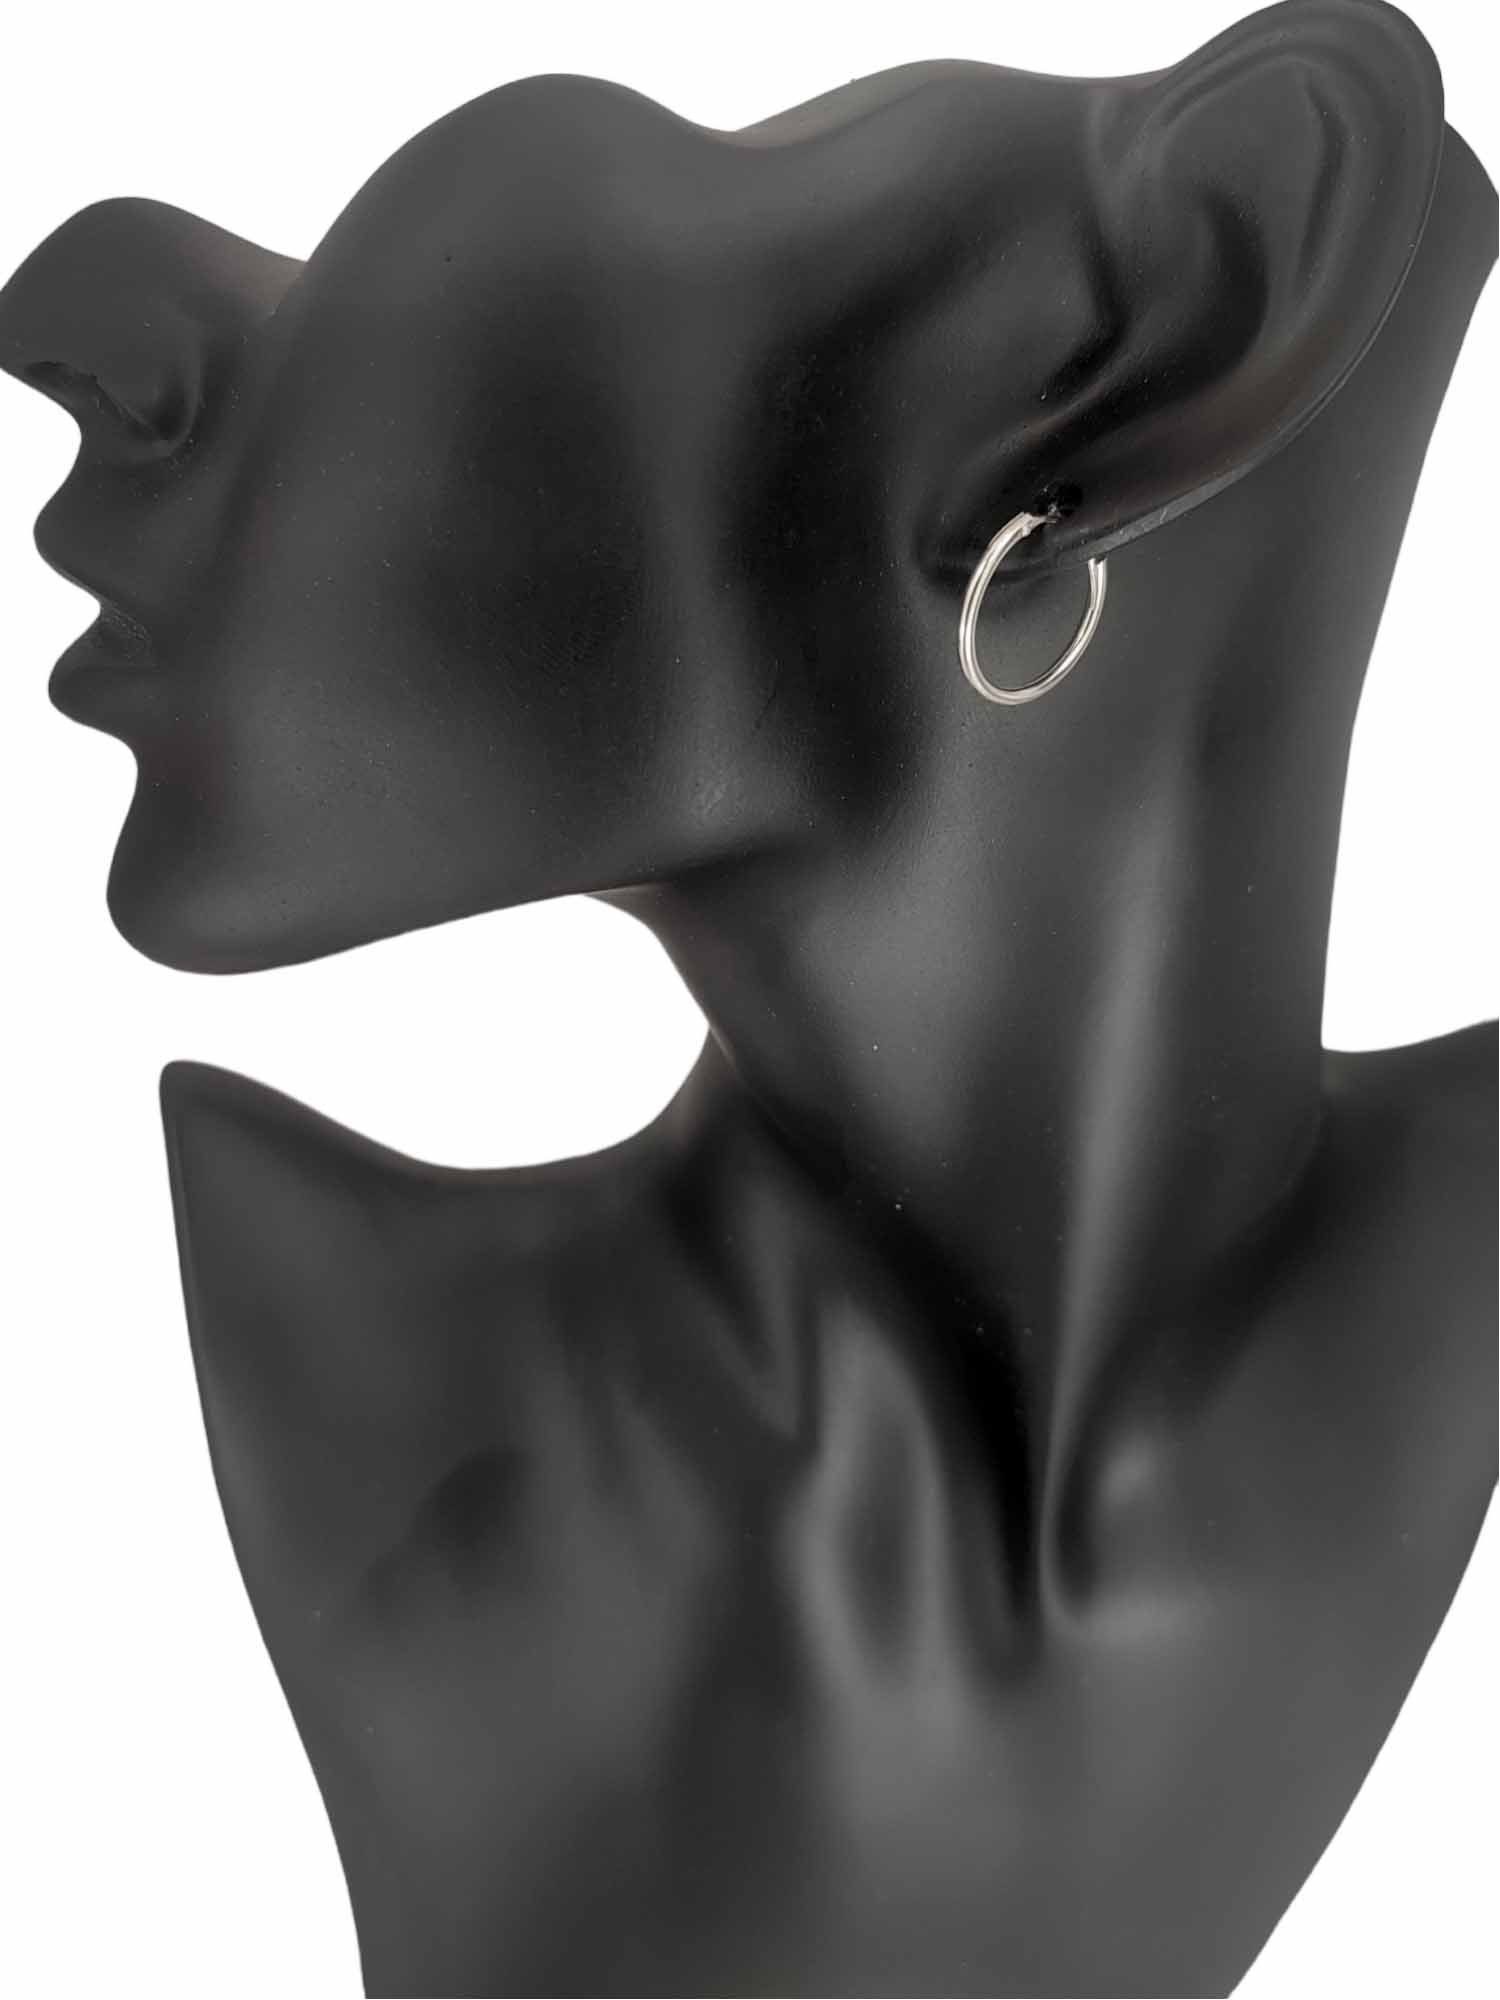 Sterling Kiss Creole Schlicht Ohrringe 925 Ohr Kreole Silber Leather of Paarpreis Ohrring-Set